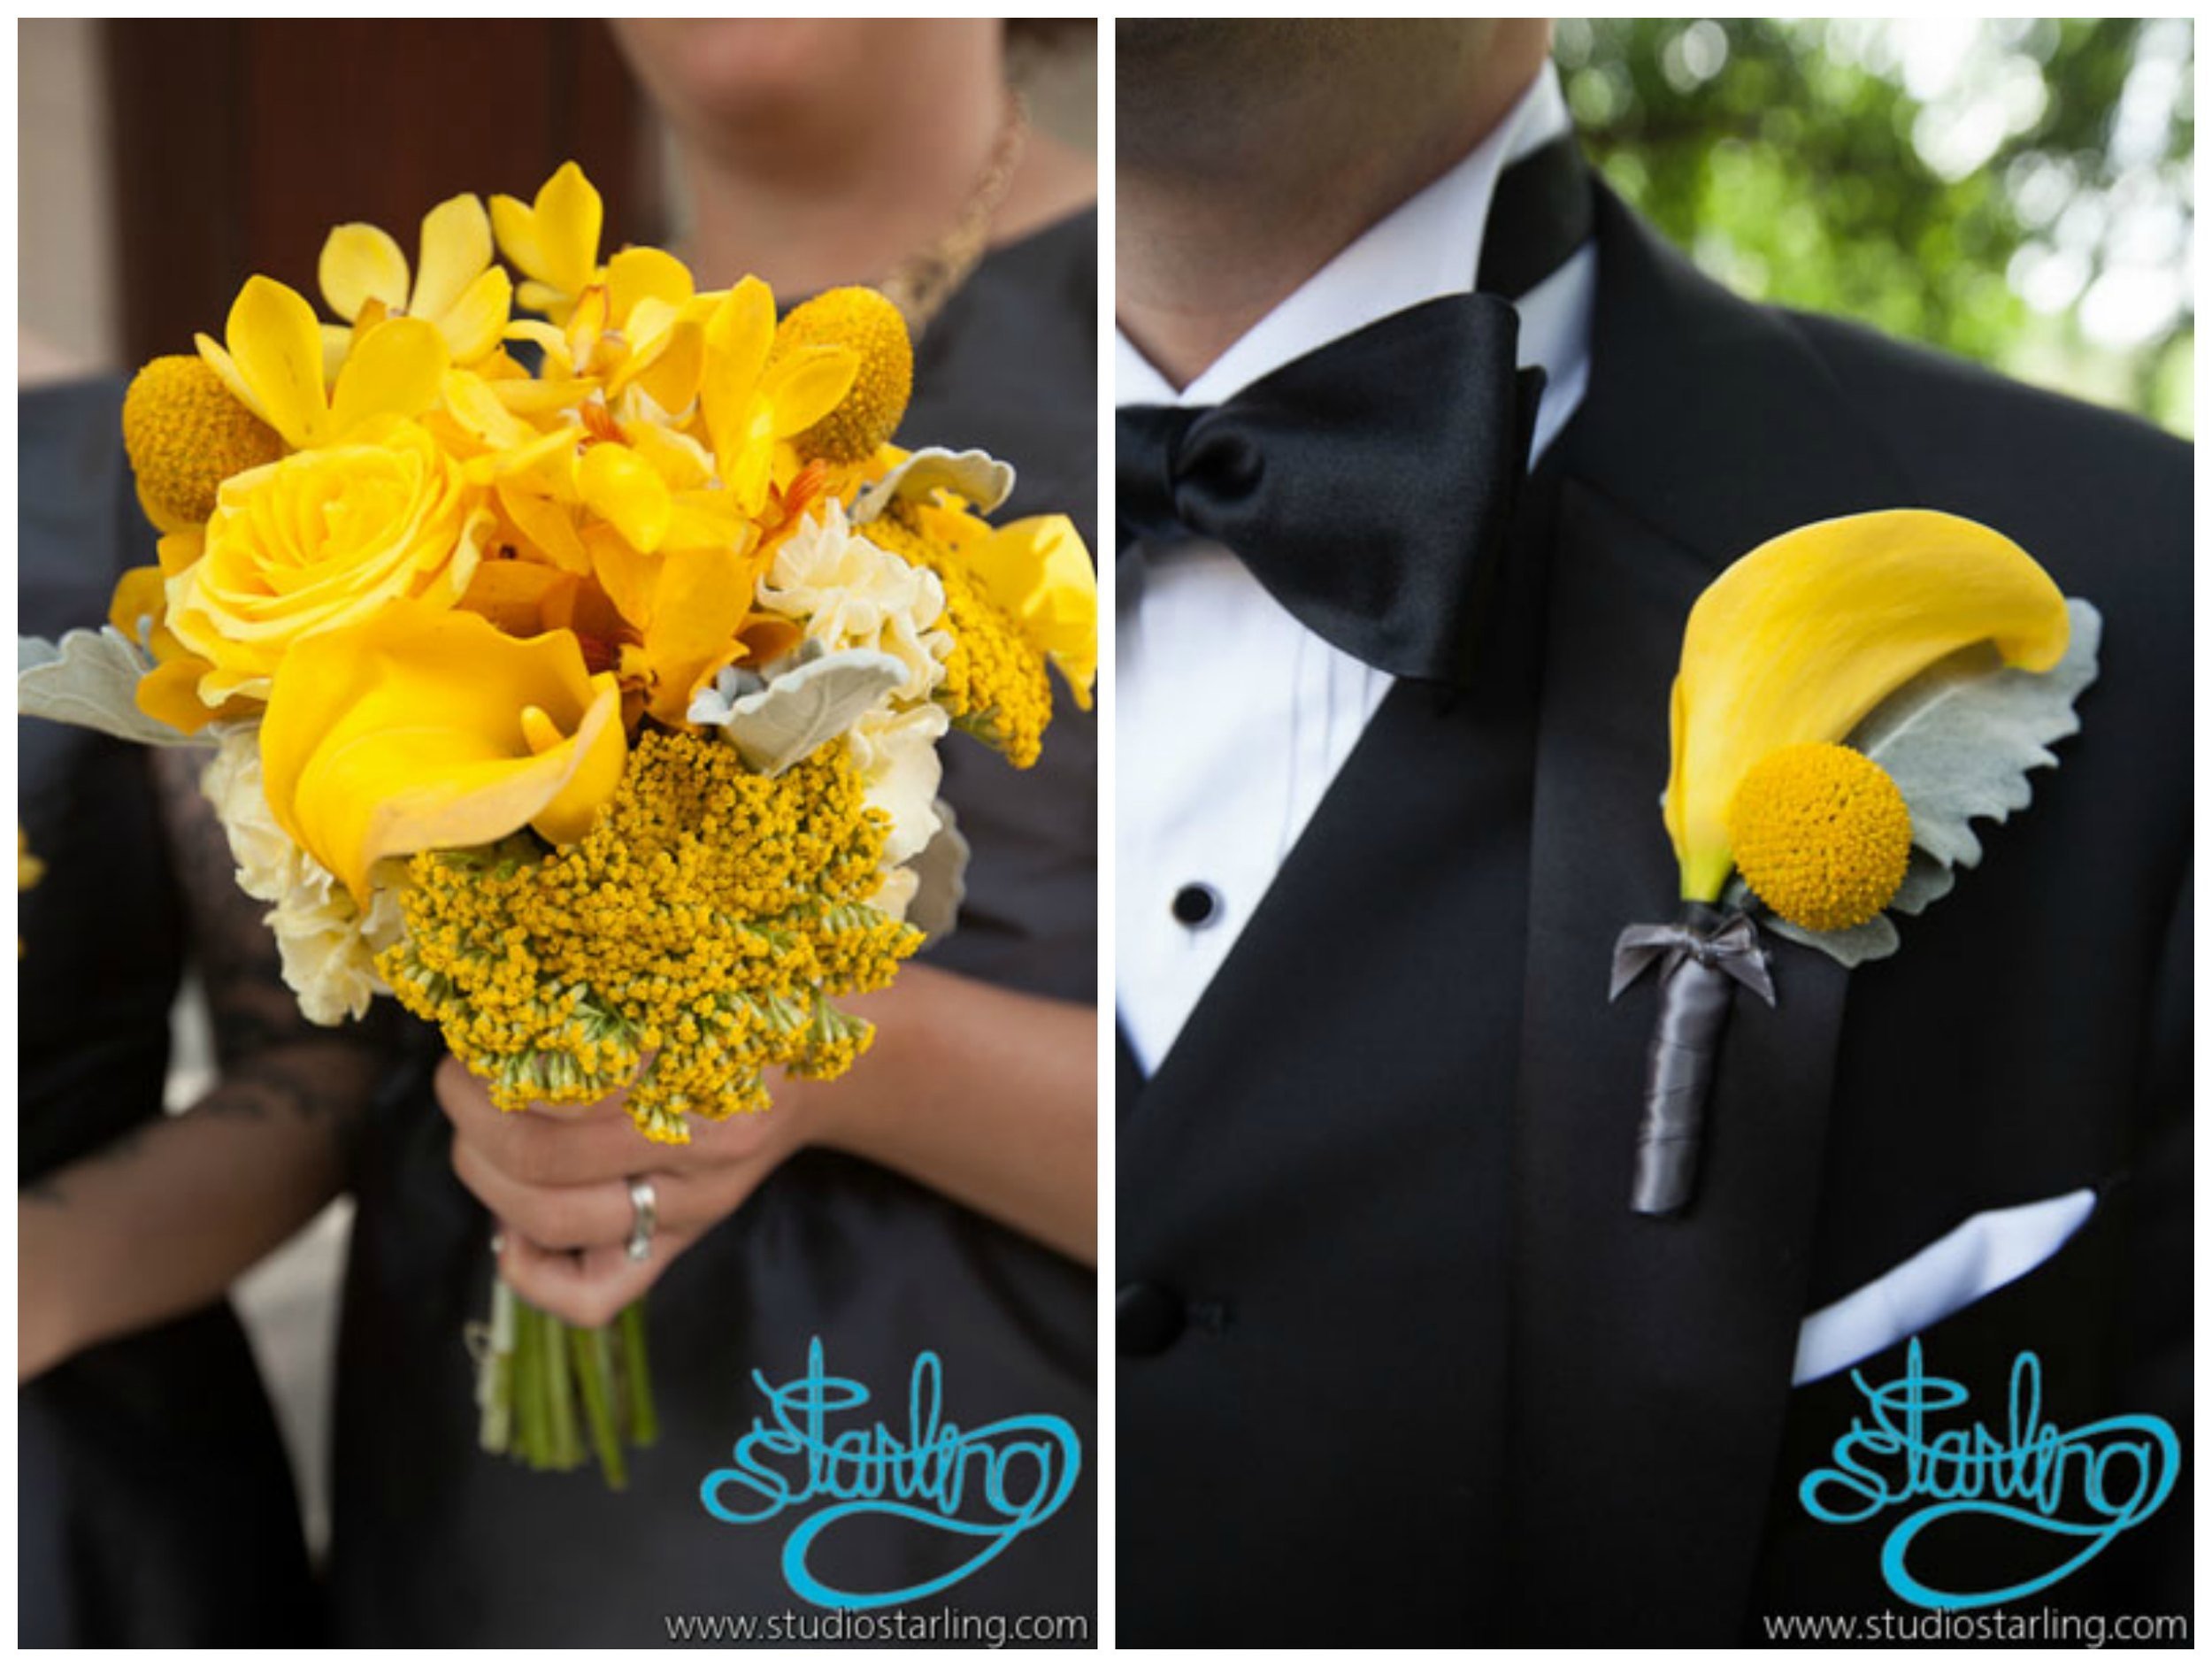 14.-U-of-C.-Studio-Starling.-Sweetchic-Events.-Exquisite-Design.-Yellow-stock-calla-billy-ball-roses-dusty-miller-bouquet.-Yellow-Calla-Billy-Bally-Boutonniere..jpg